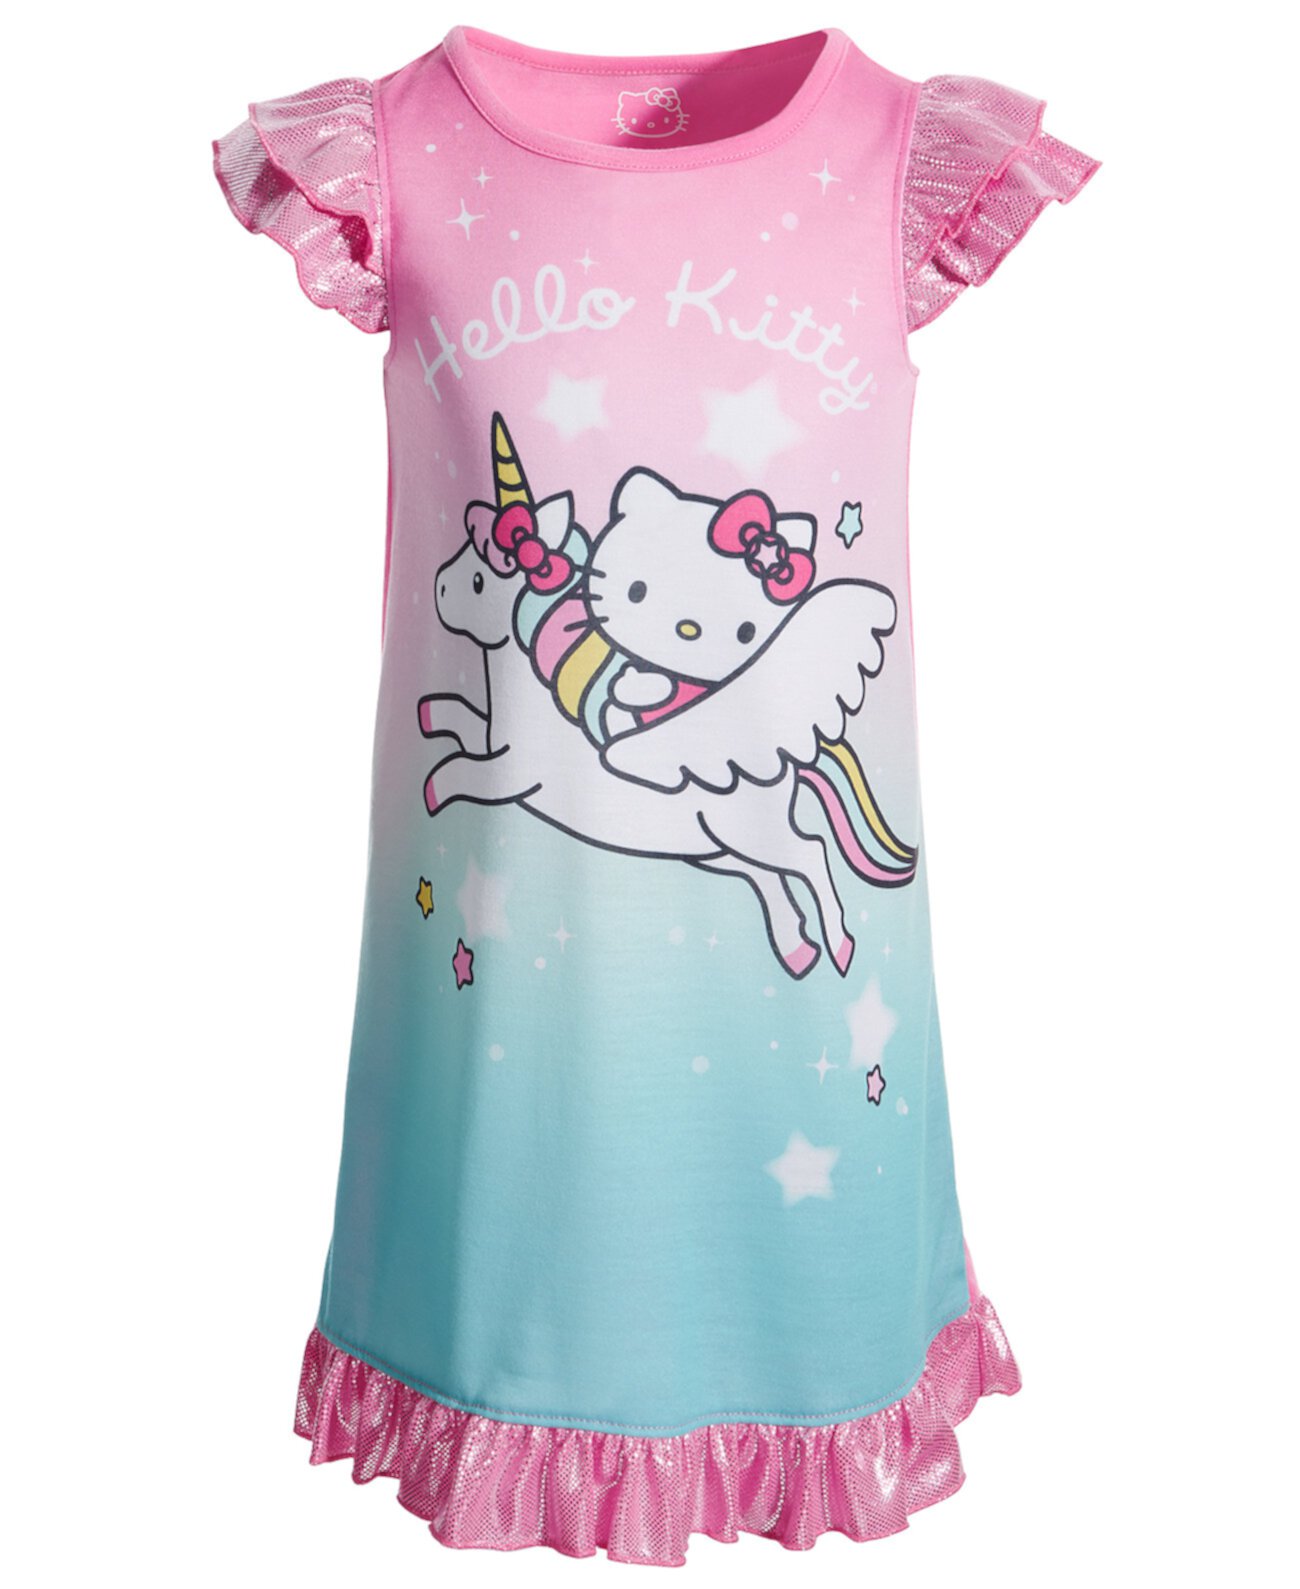 Toddler Girls Shimmer Nightgown Hello Kitty